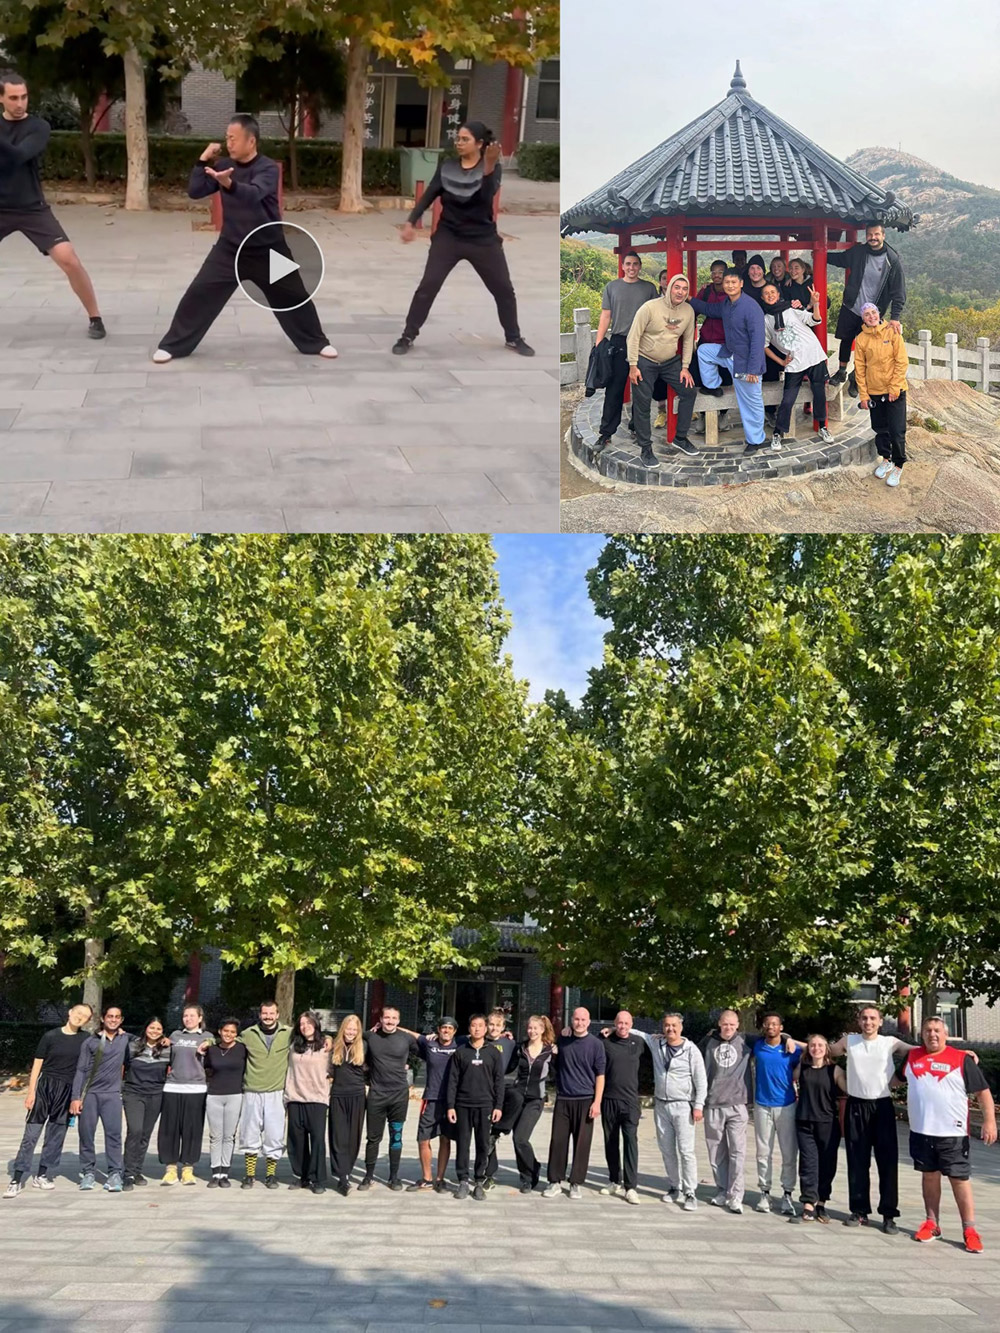 Kung Fu Students of different styles